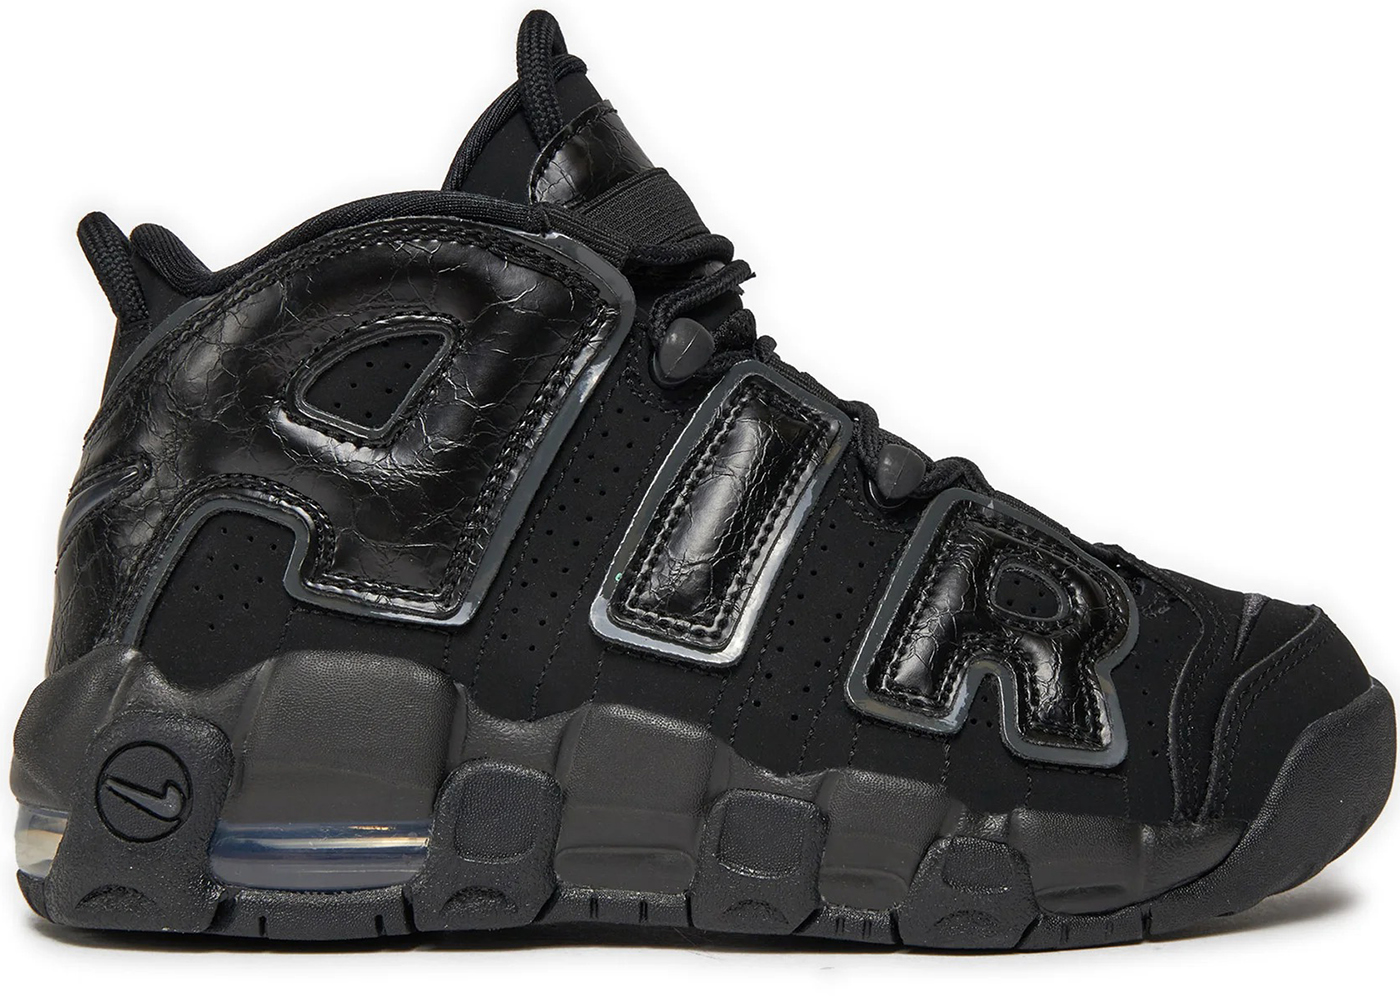 Nike Air More Uptempo Black Pink Blast (GS) キッズ - 415082-003 - JP